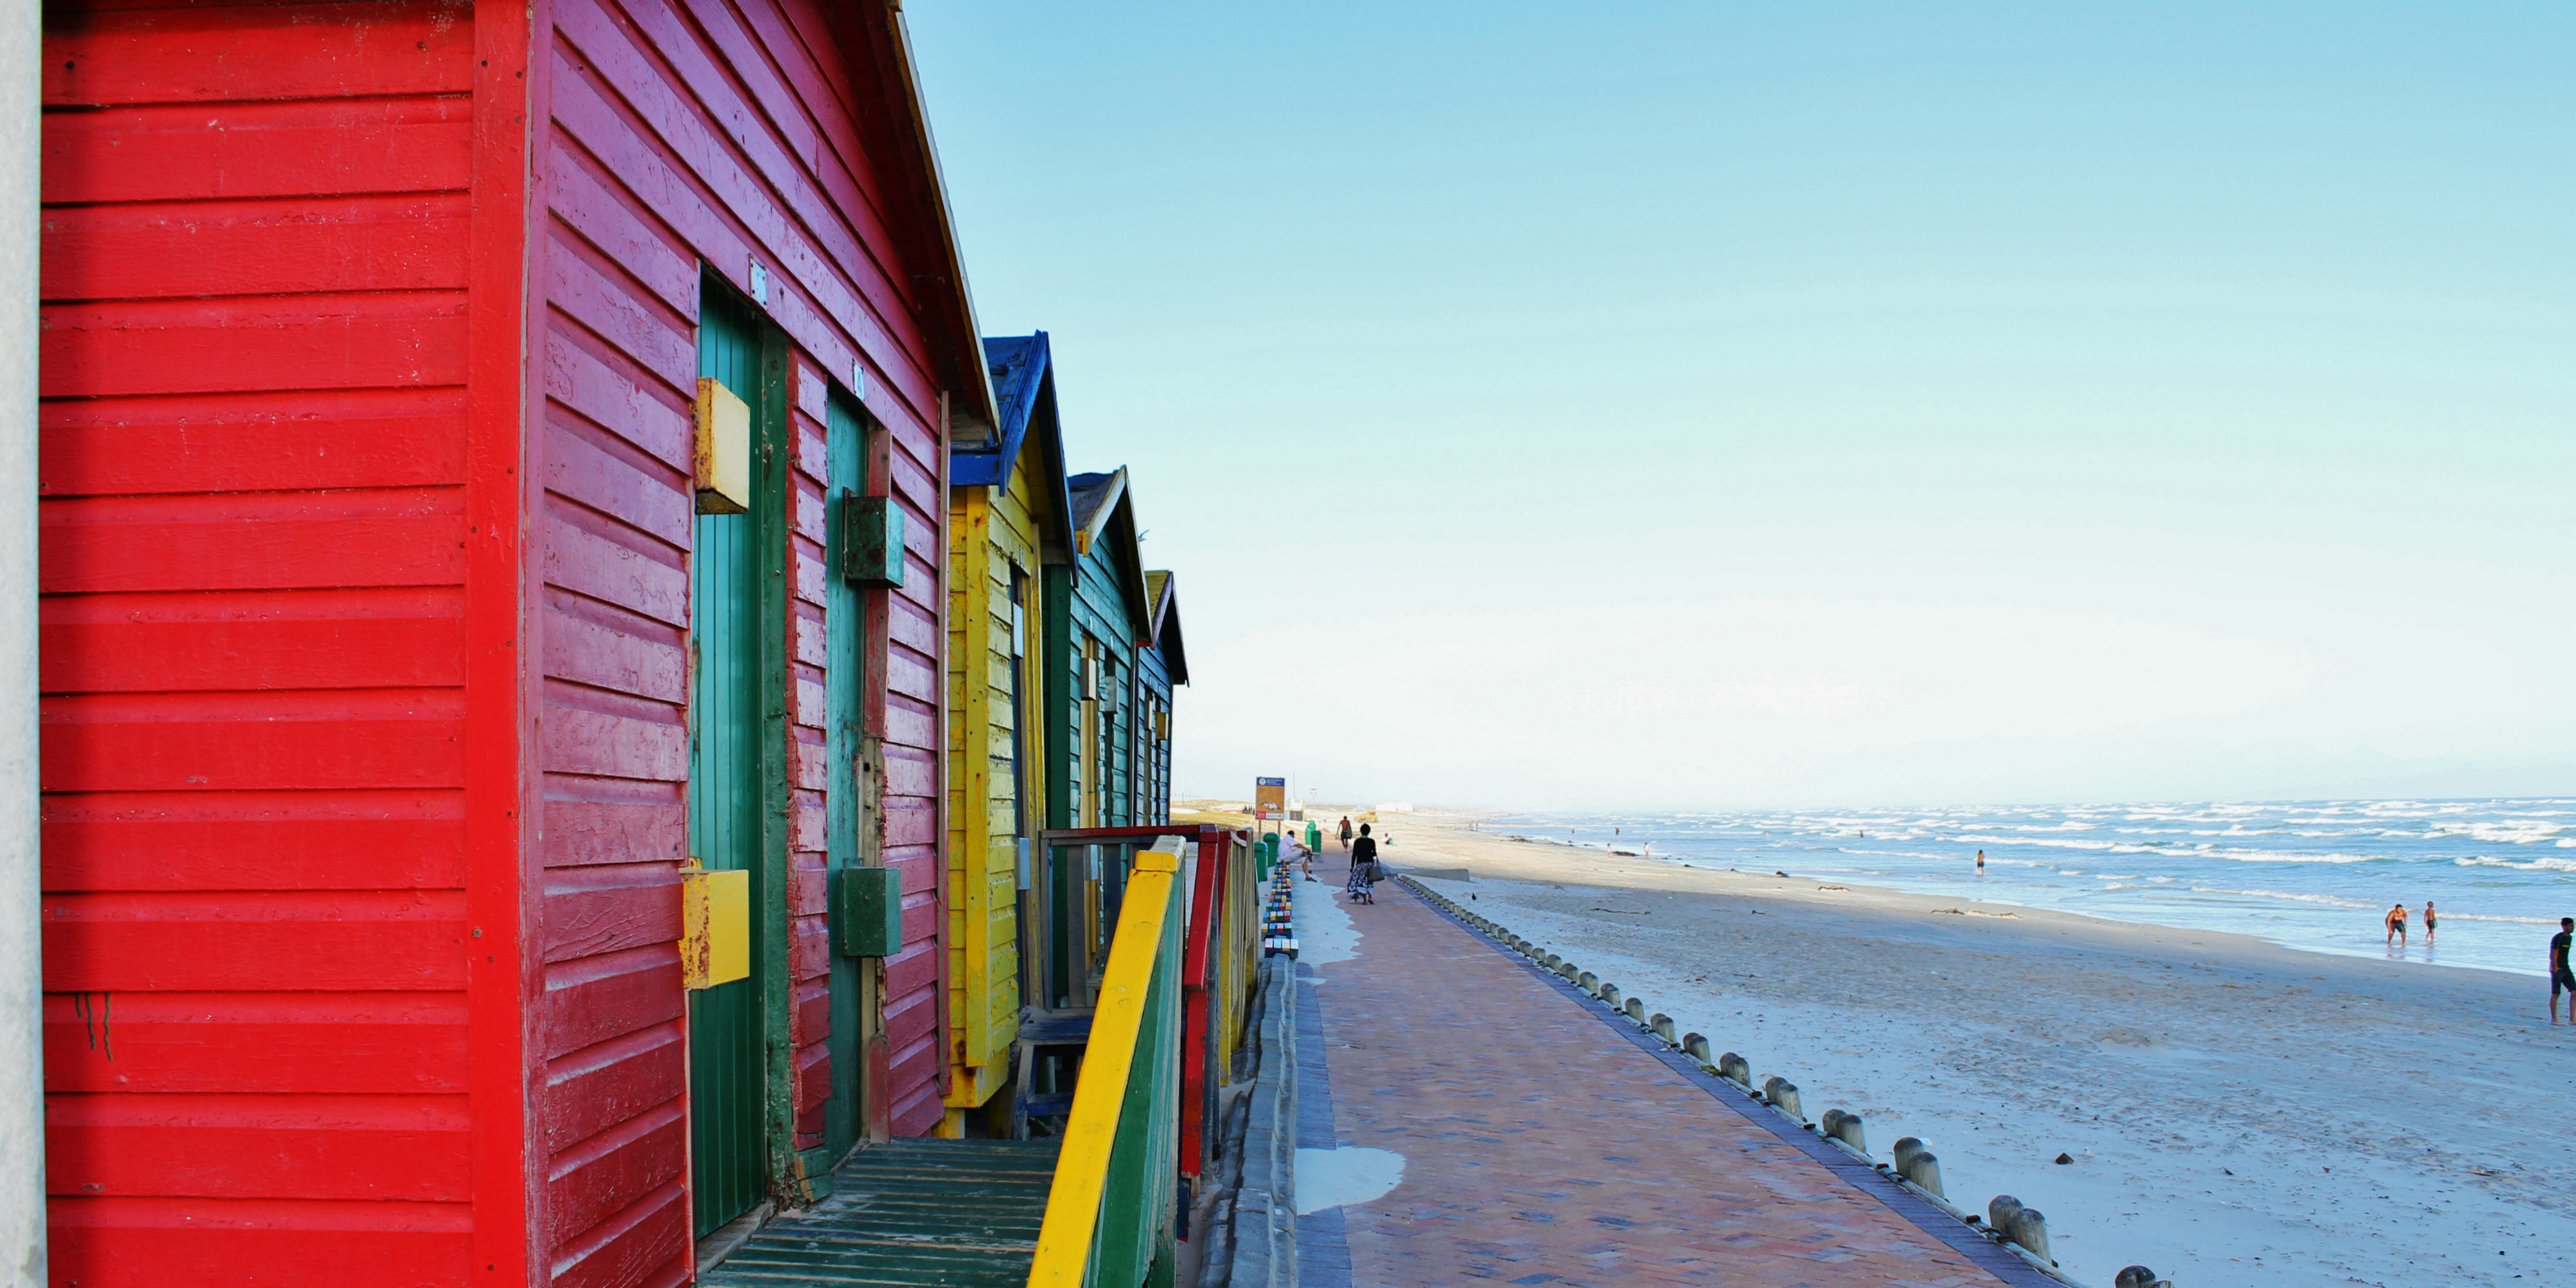 While volunteering in Cape Town, participants can visit Muizenberg Beach, with tons of things to see and do.